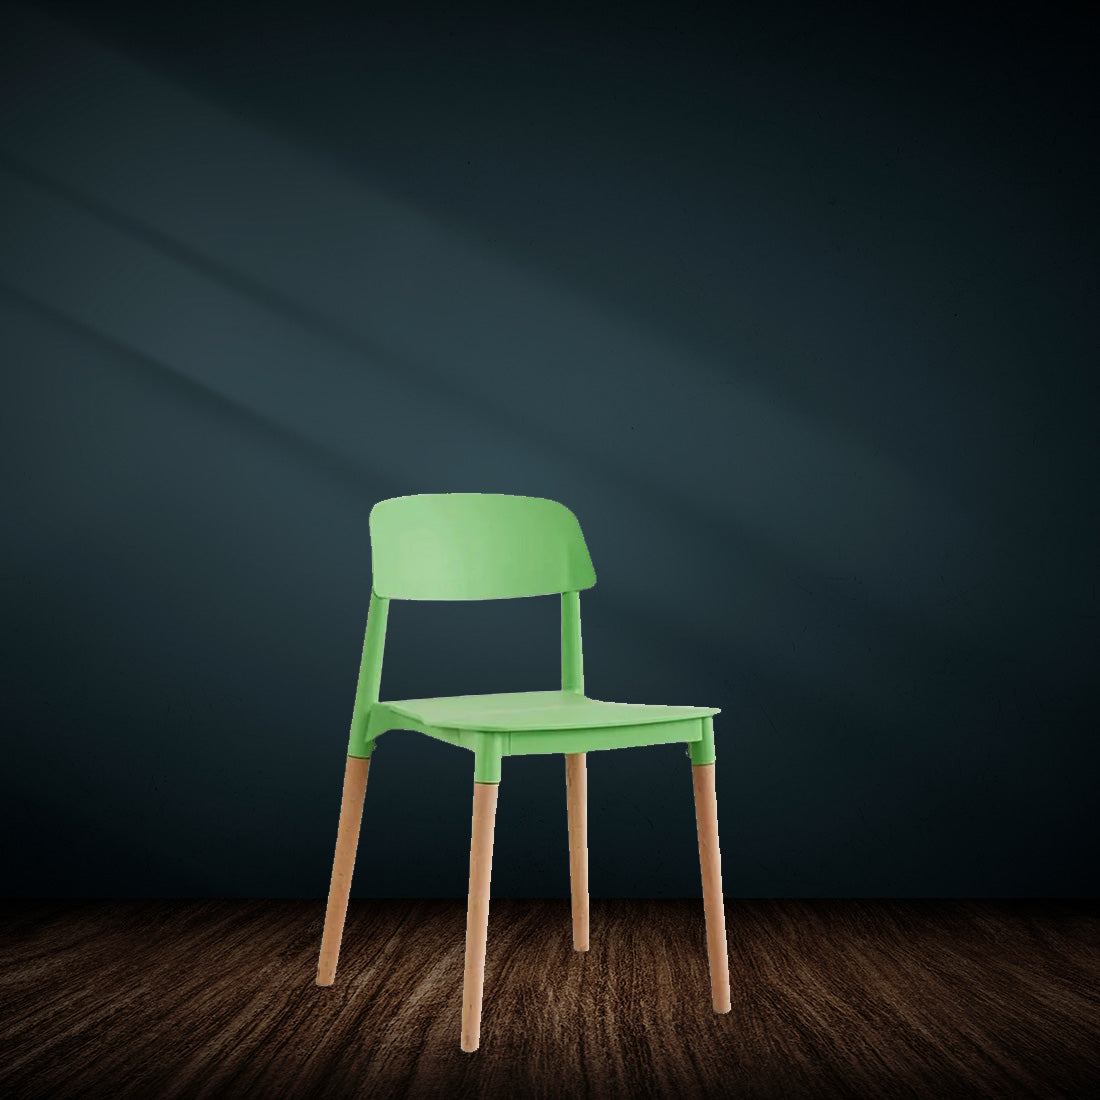 Detec™ Barcaf Chairs in 3 Colors